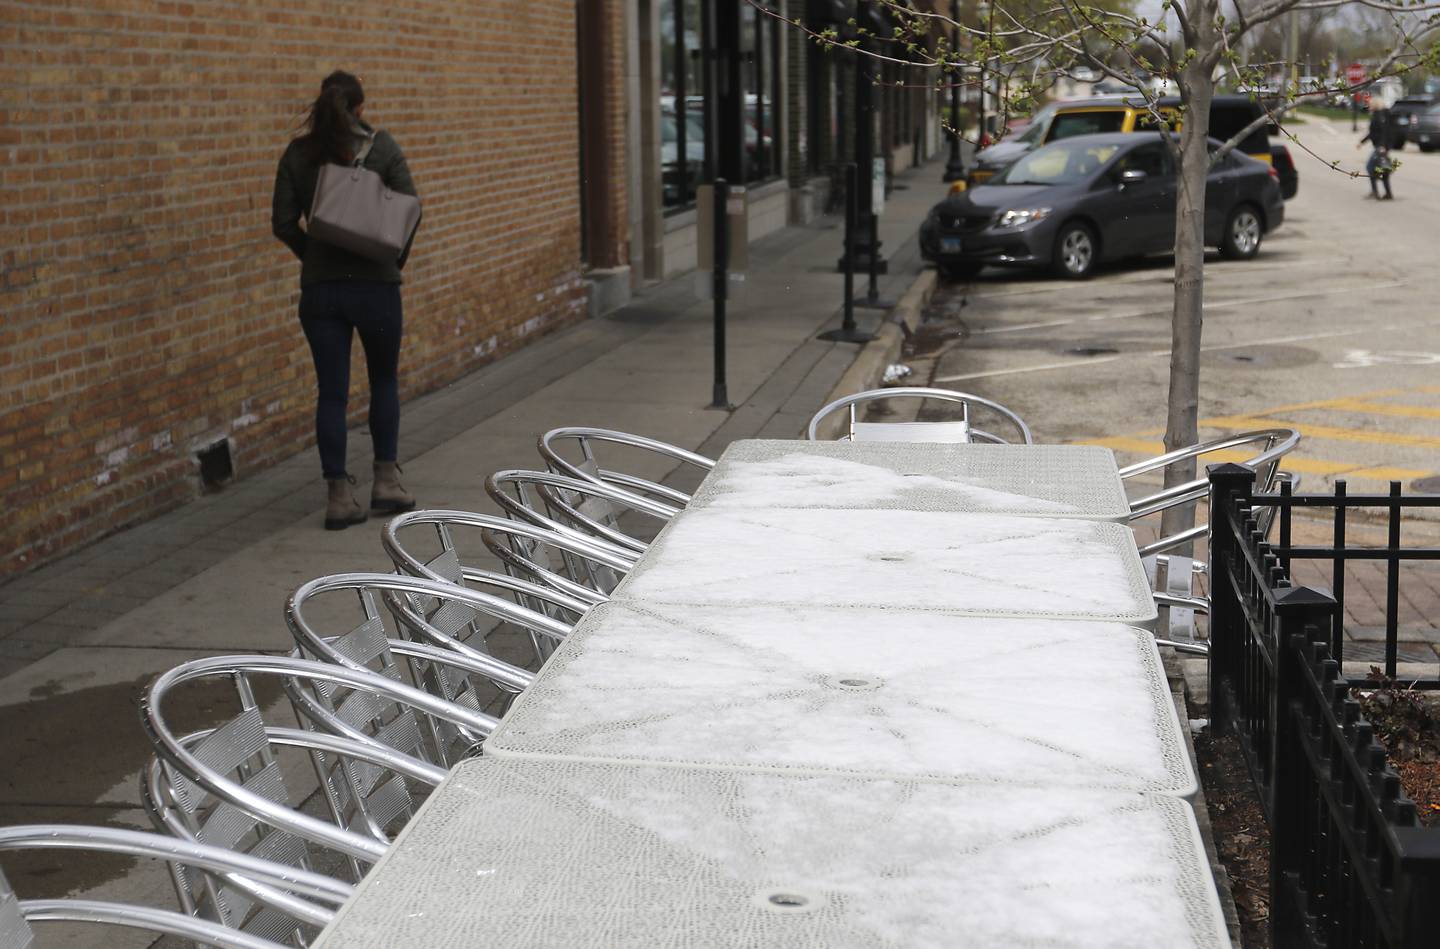 A women walks past the snow-covered tables outside Cafe Olympia in downtown Crystal Lake on Monday, April 17, 2023, after the McHenry County area received a dusting of snow overnight.